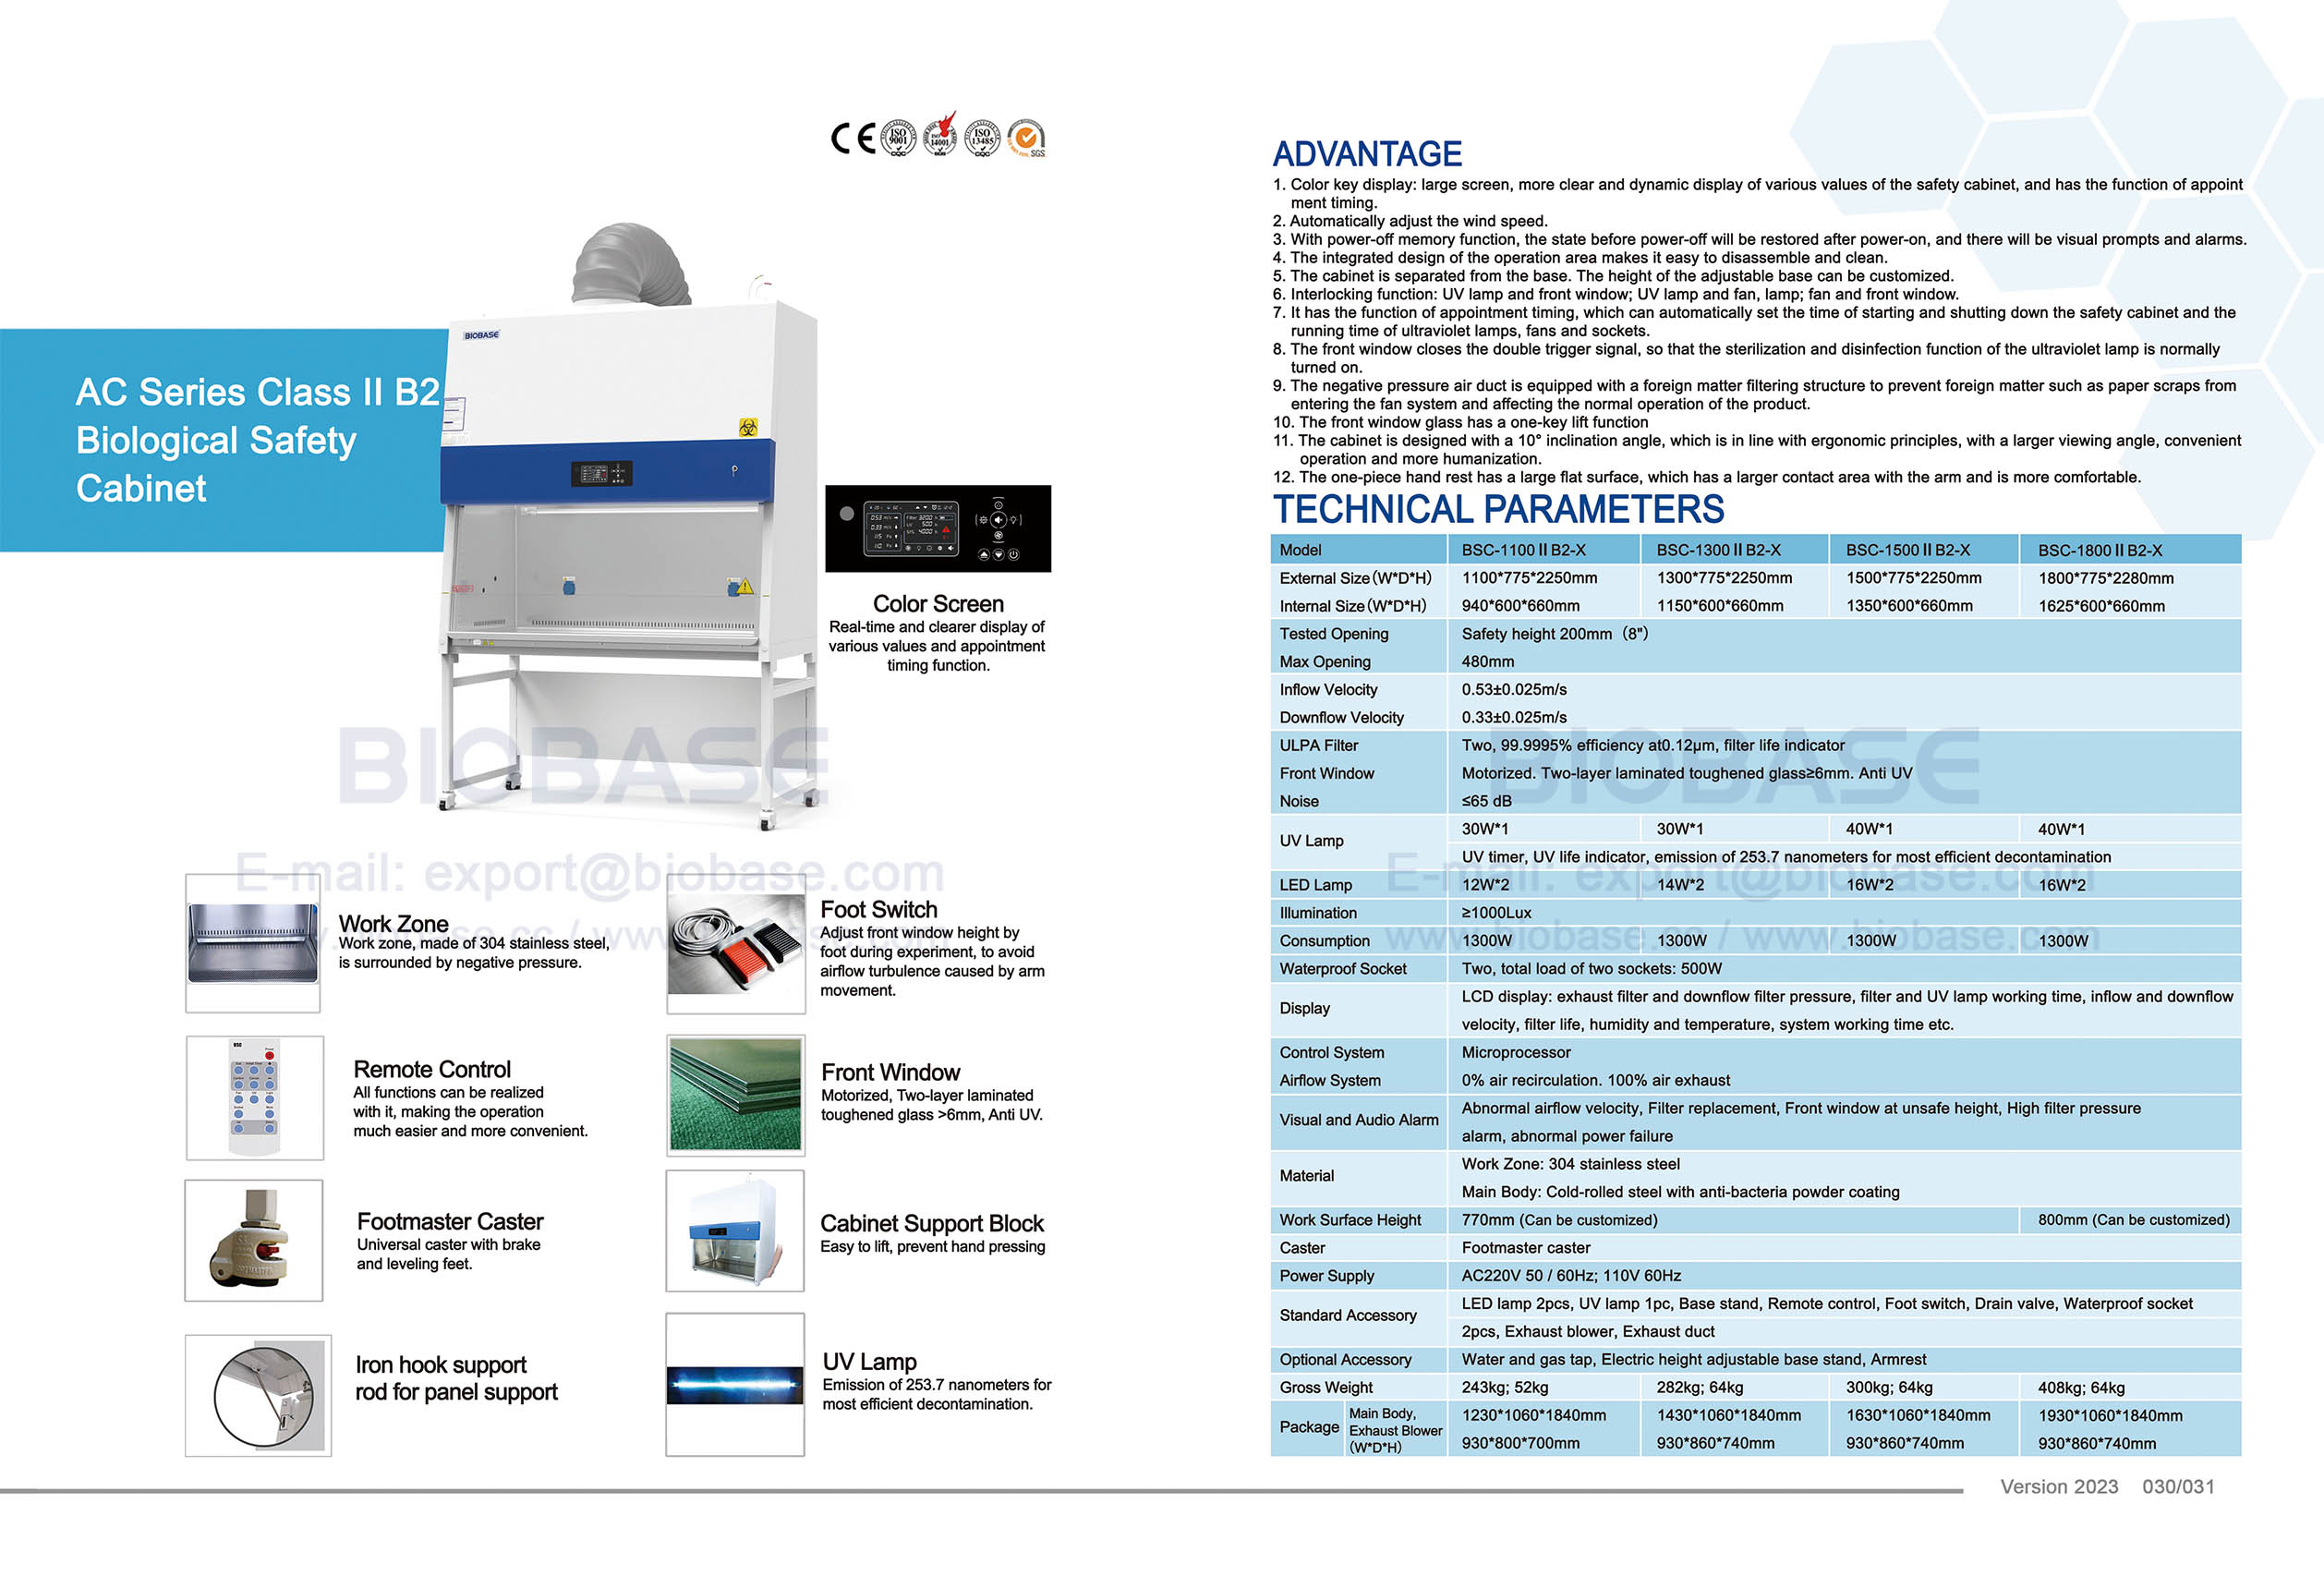 30-31 AC Series Class II B2 Biological Safety Cabinet BSC-1100 II B2-X & BSC-1300 II B2-X & BSC-1500 II B2-X & BSC-1800 II B2-X